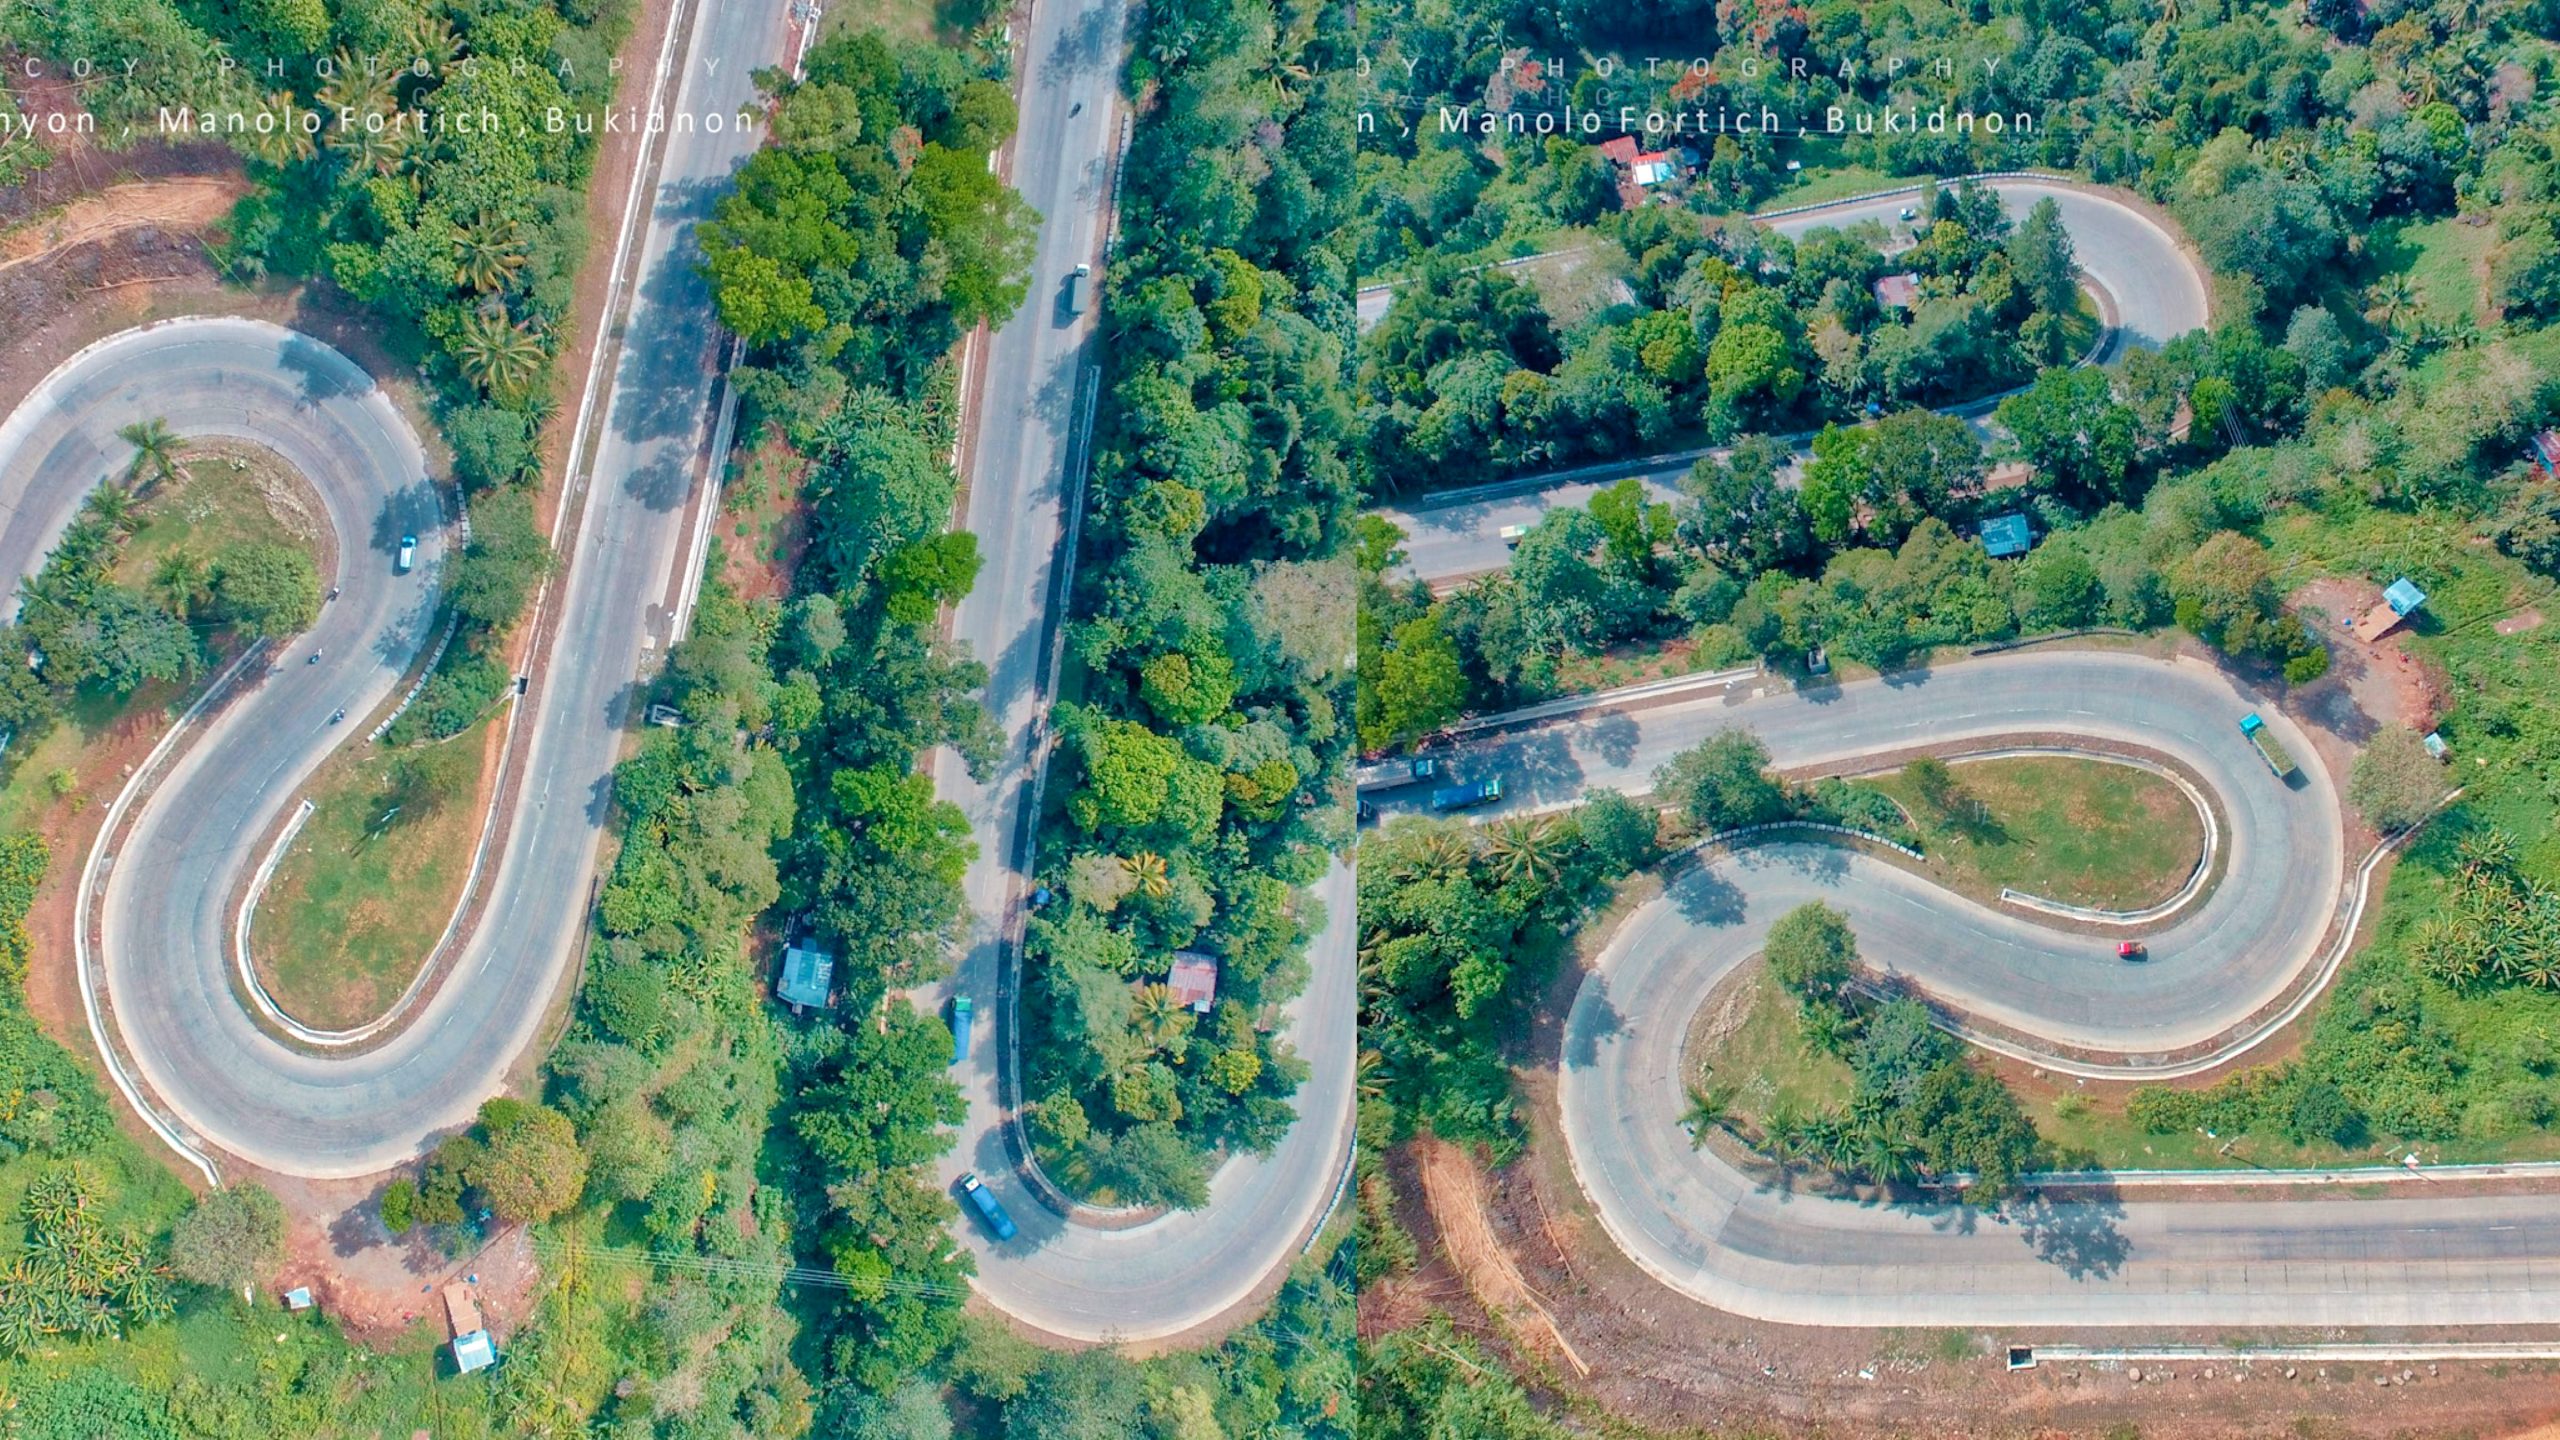 Mangima "Zigzag" Road Aerial View in Manolo Fortich, Bukidnon